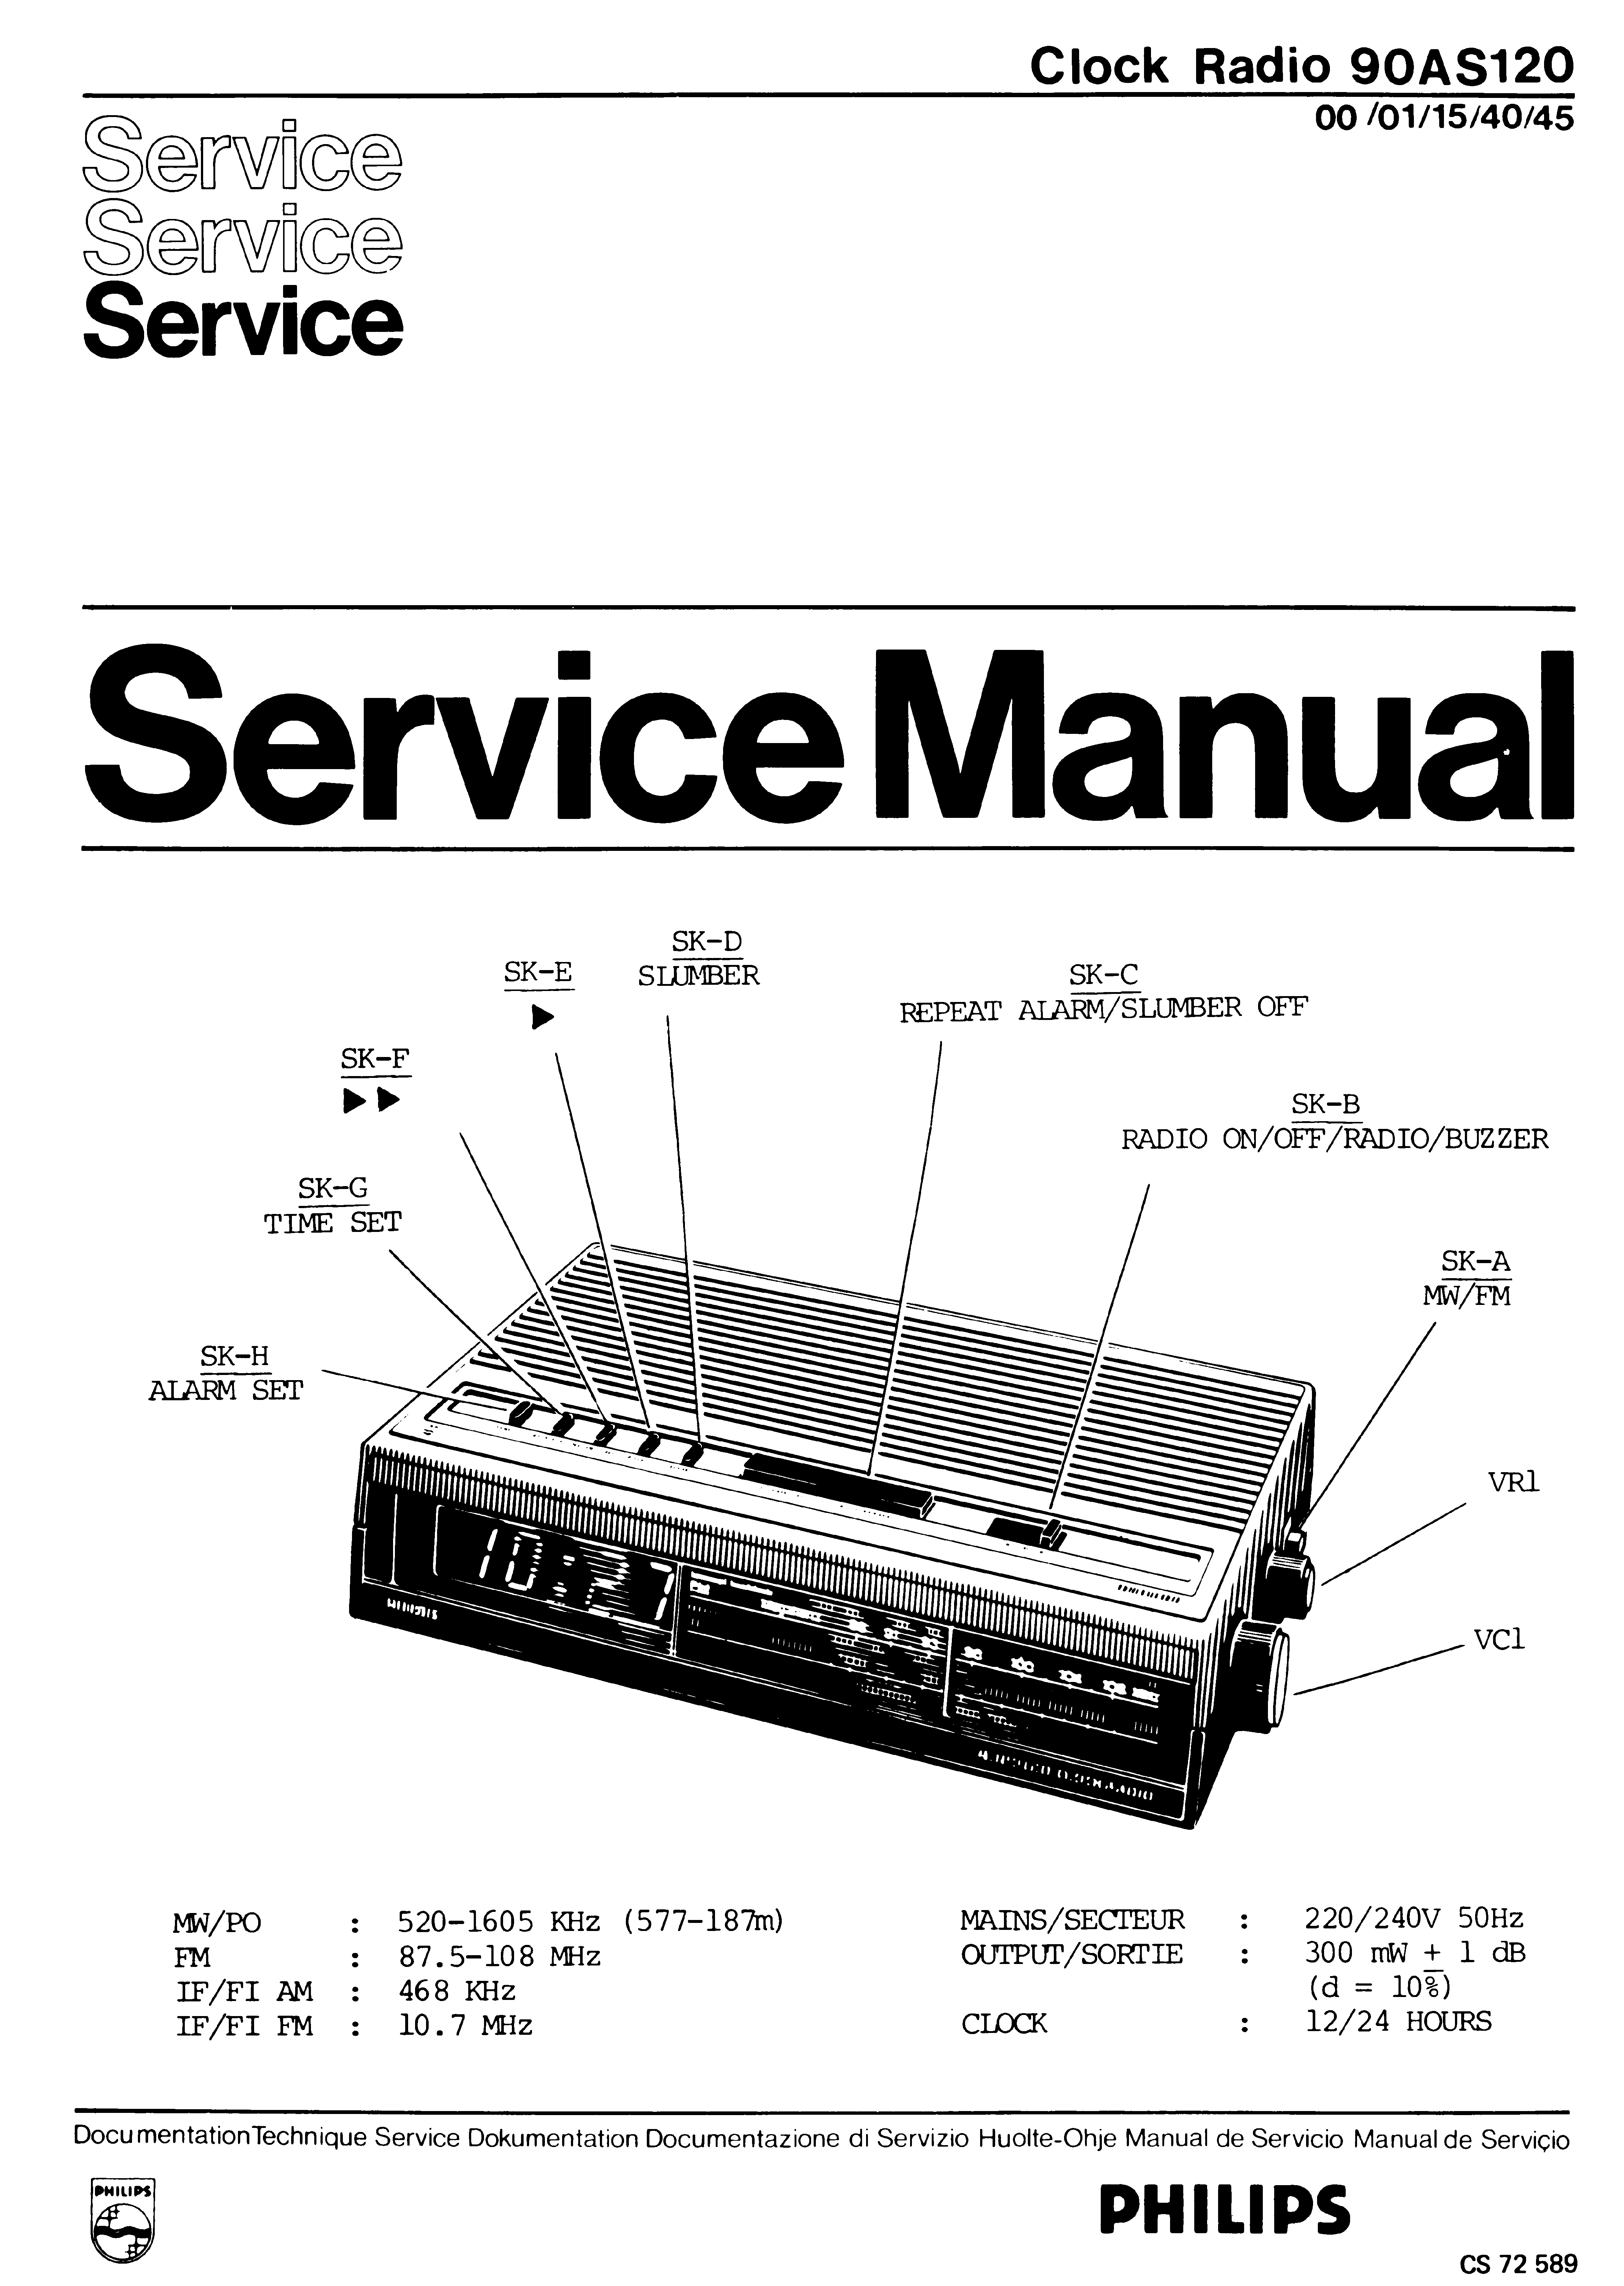 PHILIPS CLOCK RADIO 90AS120 SM service manual (1st page)